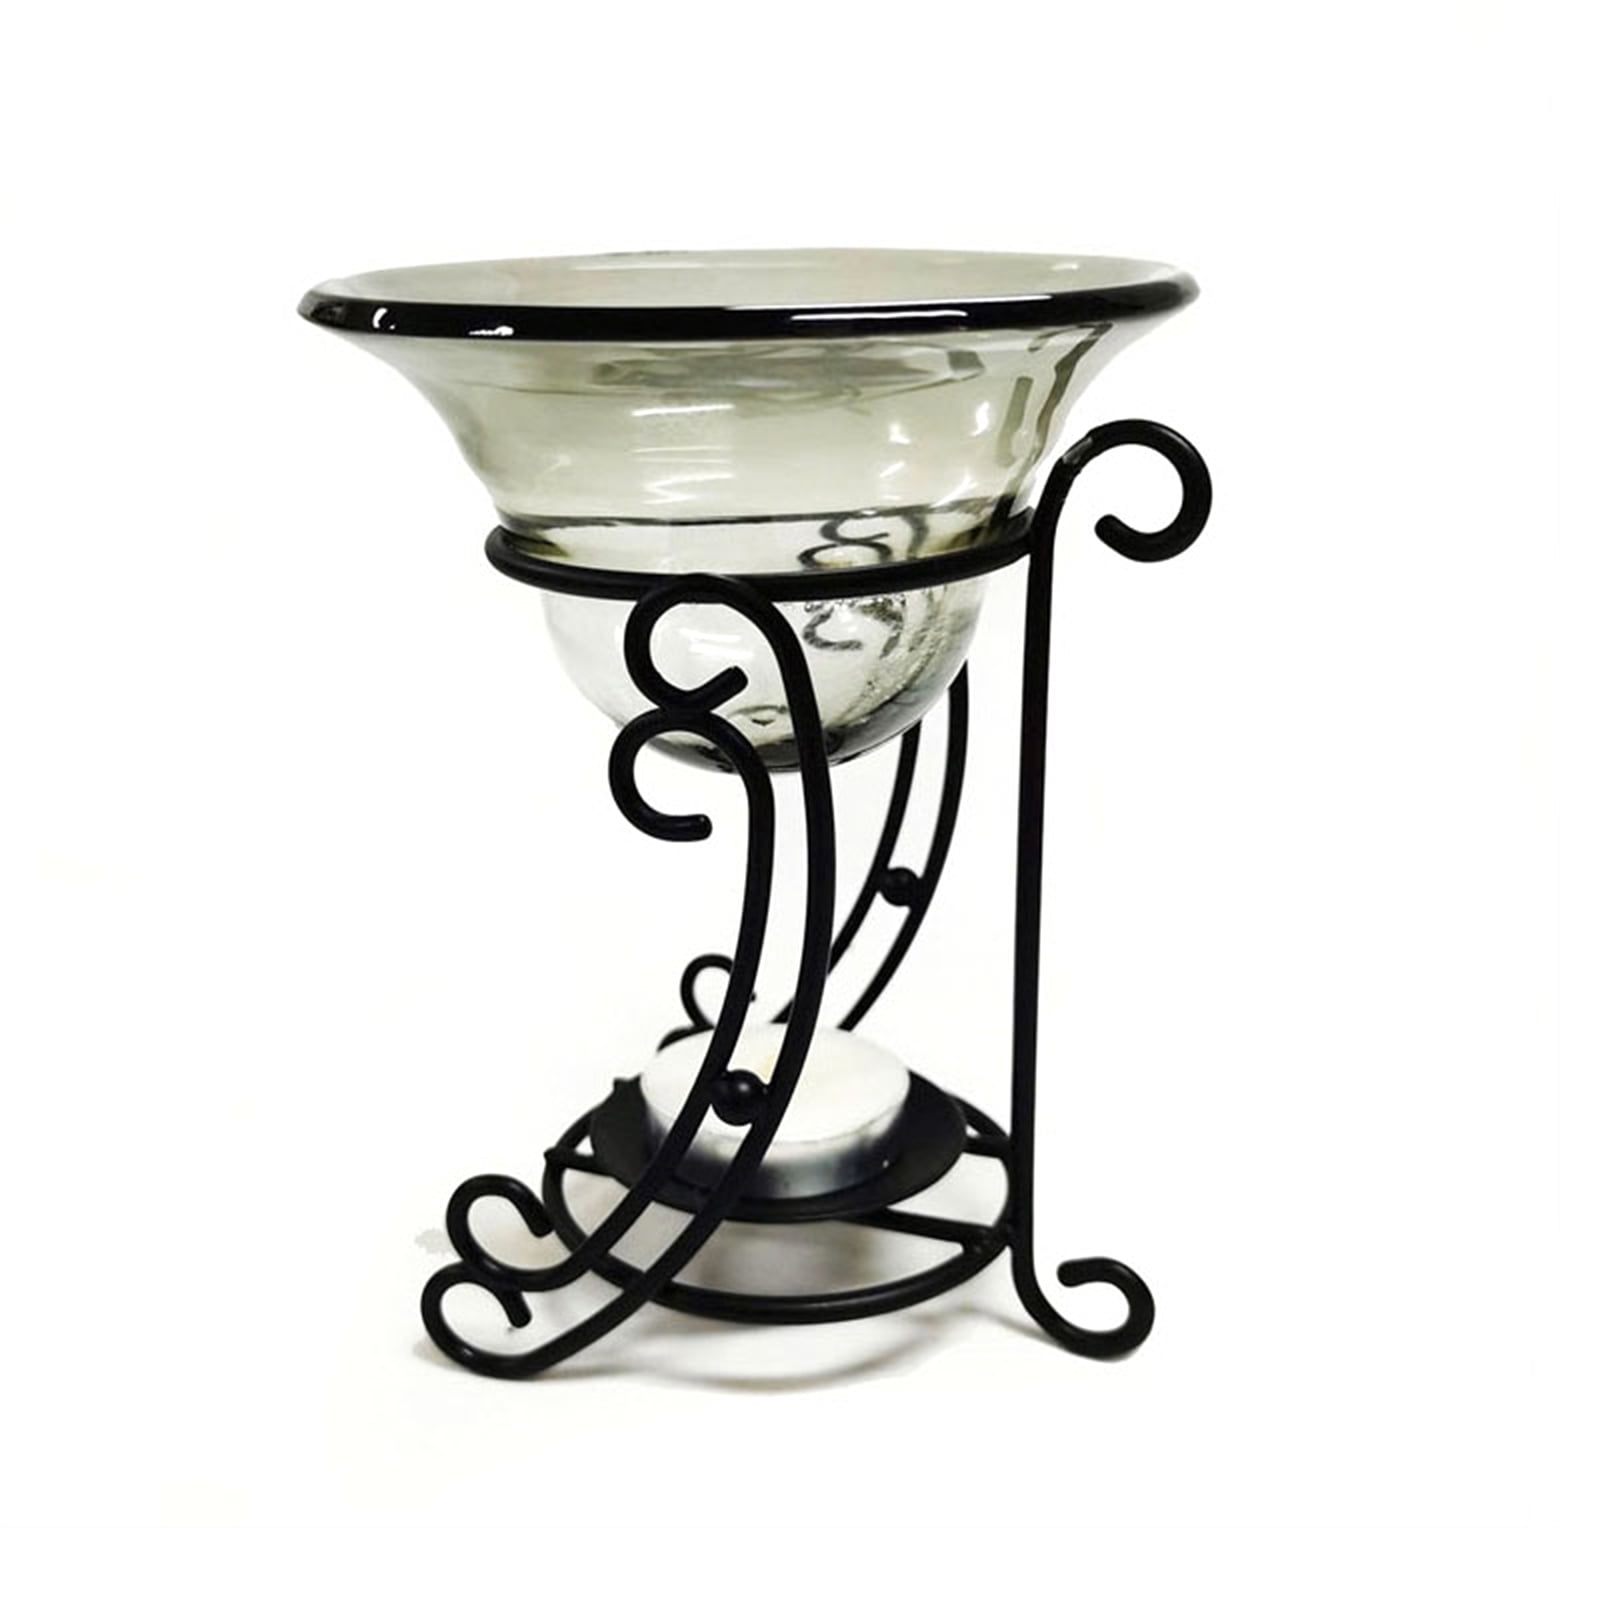 Oil burner curved scroll black metal glass gift present tea light candle and Oil 